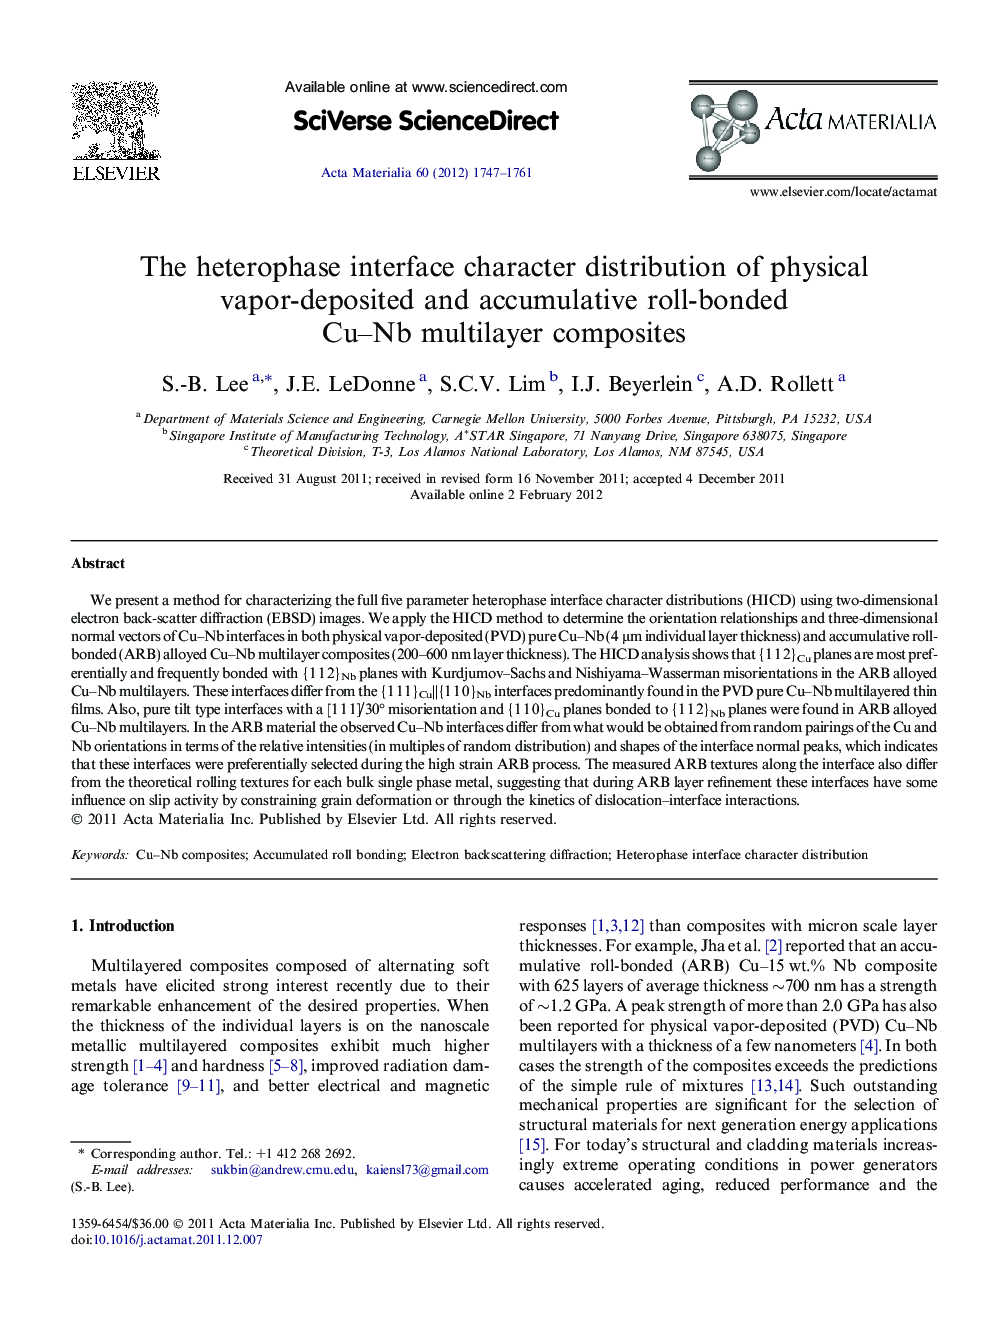 The heterophase interface character distribution of physical vapor-deposited and accumulative roll-bonded Cu–Nb multilayer composites